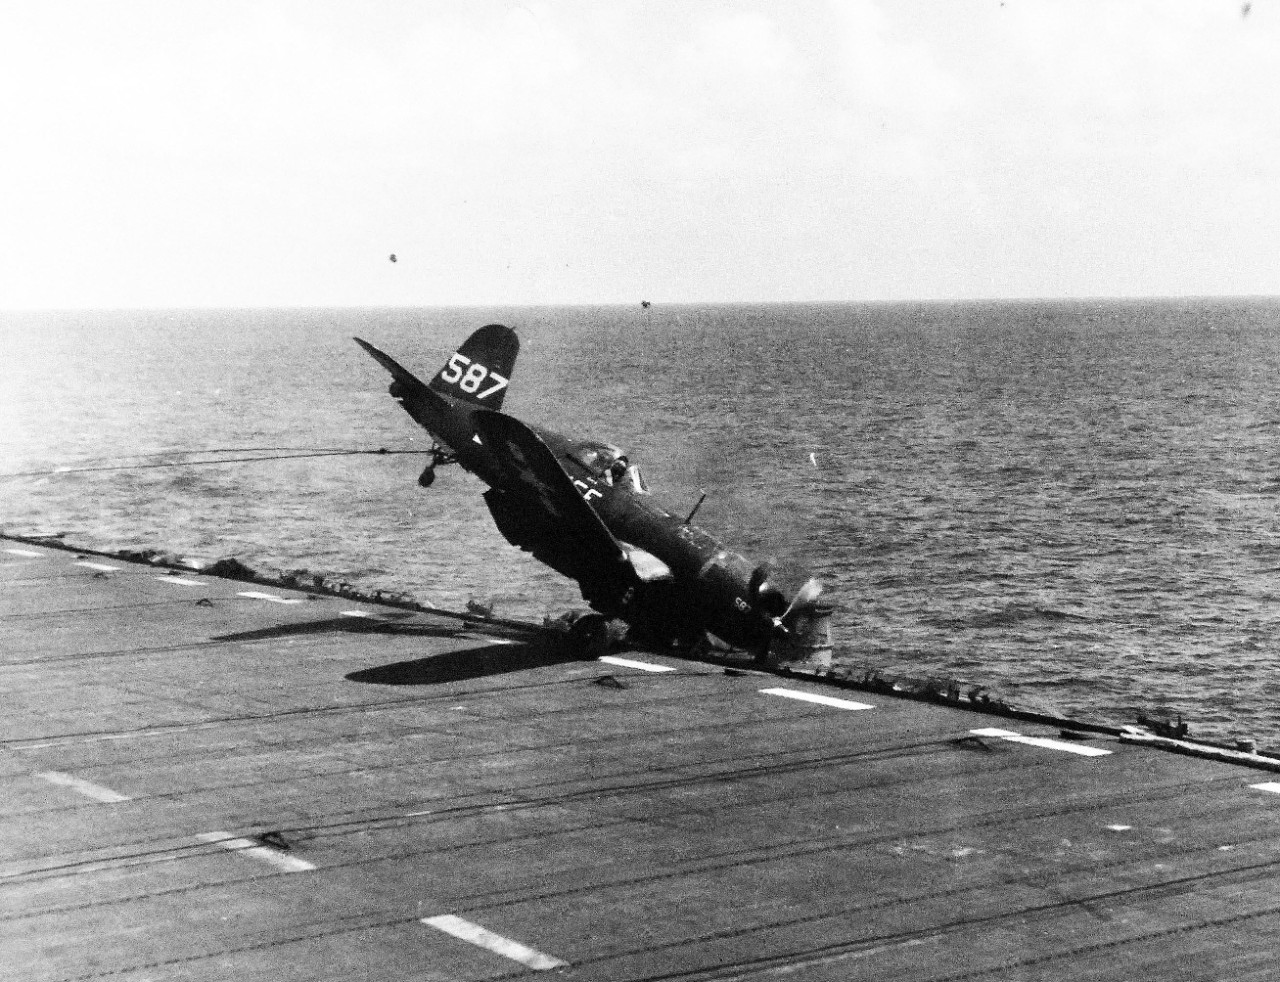 80-G-383978:  Vought F4U Corsair, April 1945.  Crash of a F4U into catwalk onboard USS Guadalcanal (CVE-60), April 5, 1945.   Official U.S. Navy photograph, now in the collections of the National Archives.  